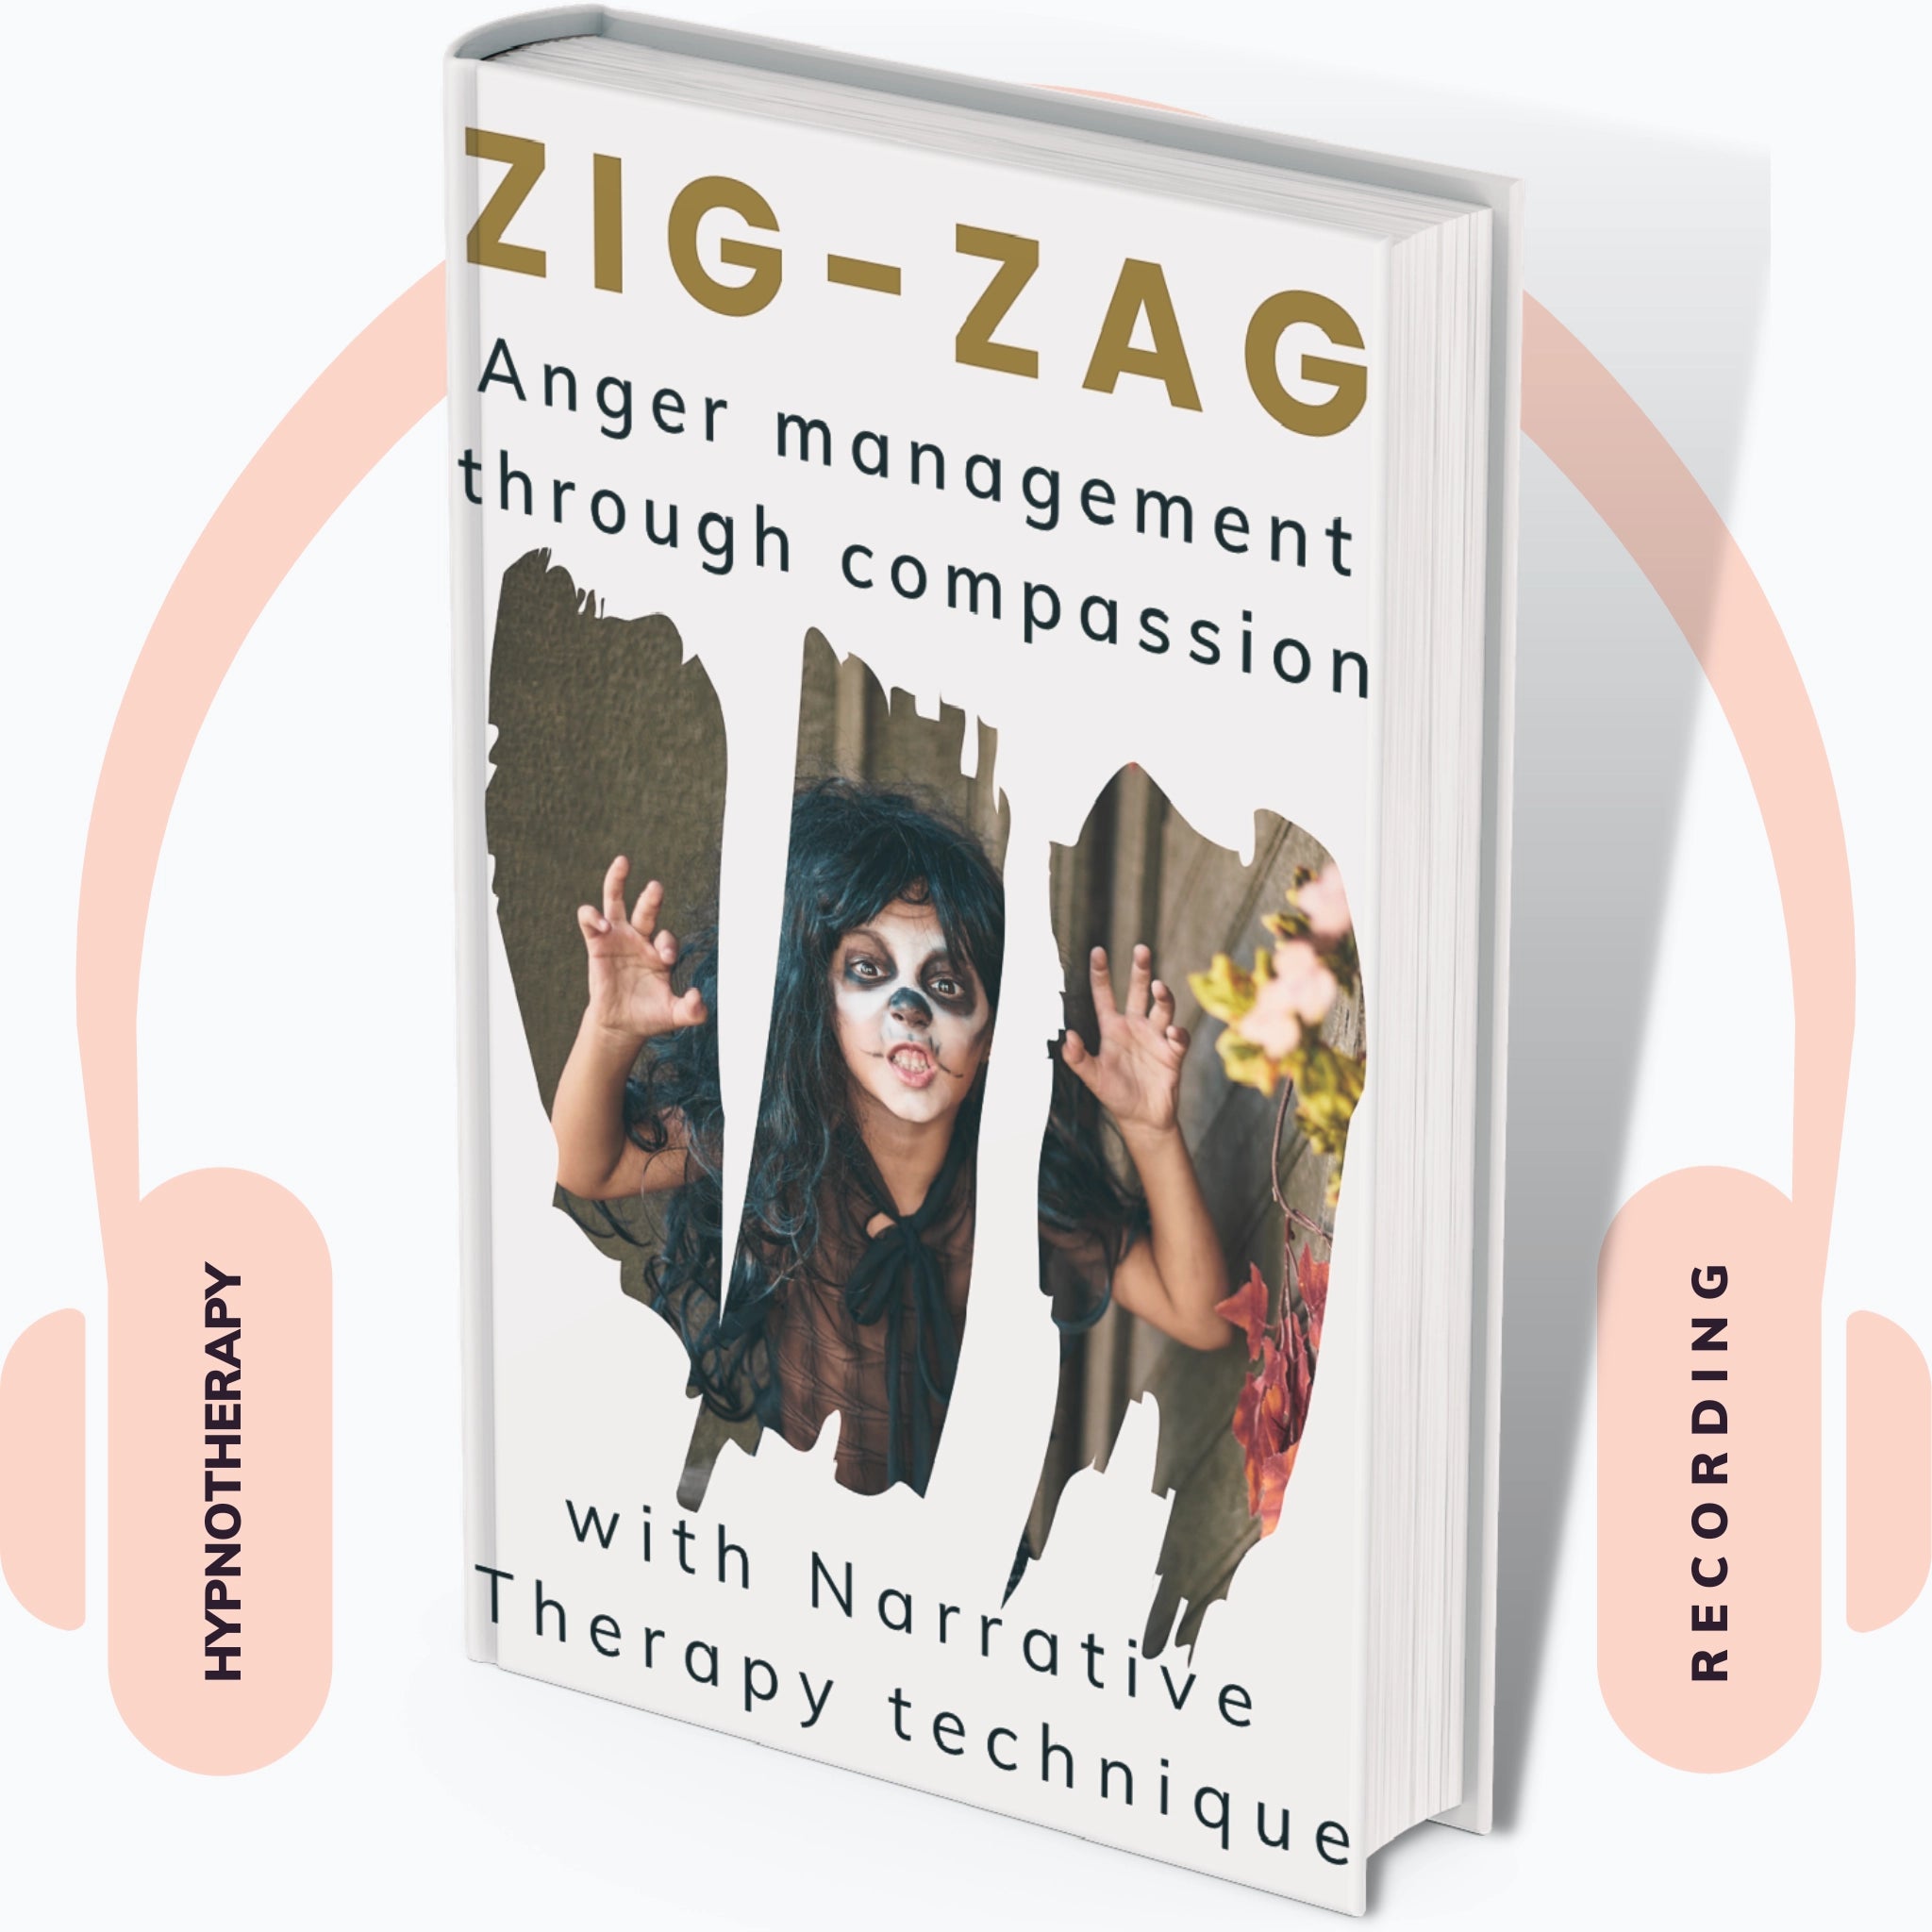 Audiobook cover: Zig-Zag, Anger Management through compassion, with Narrative Therapy technique